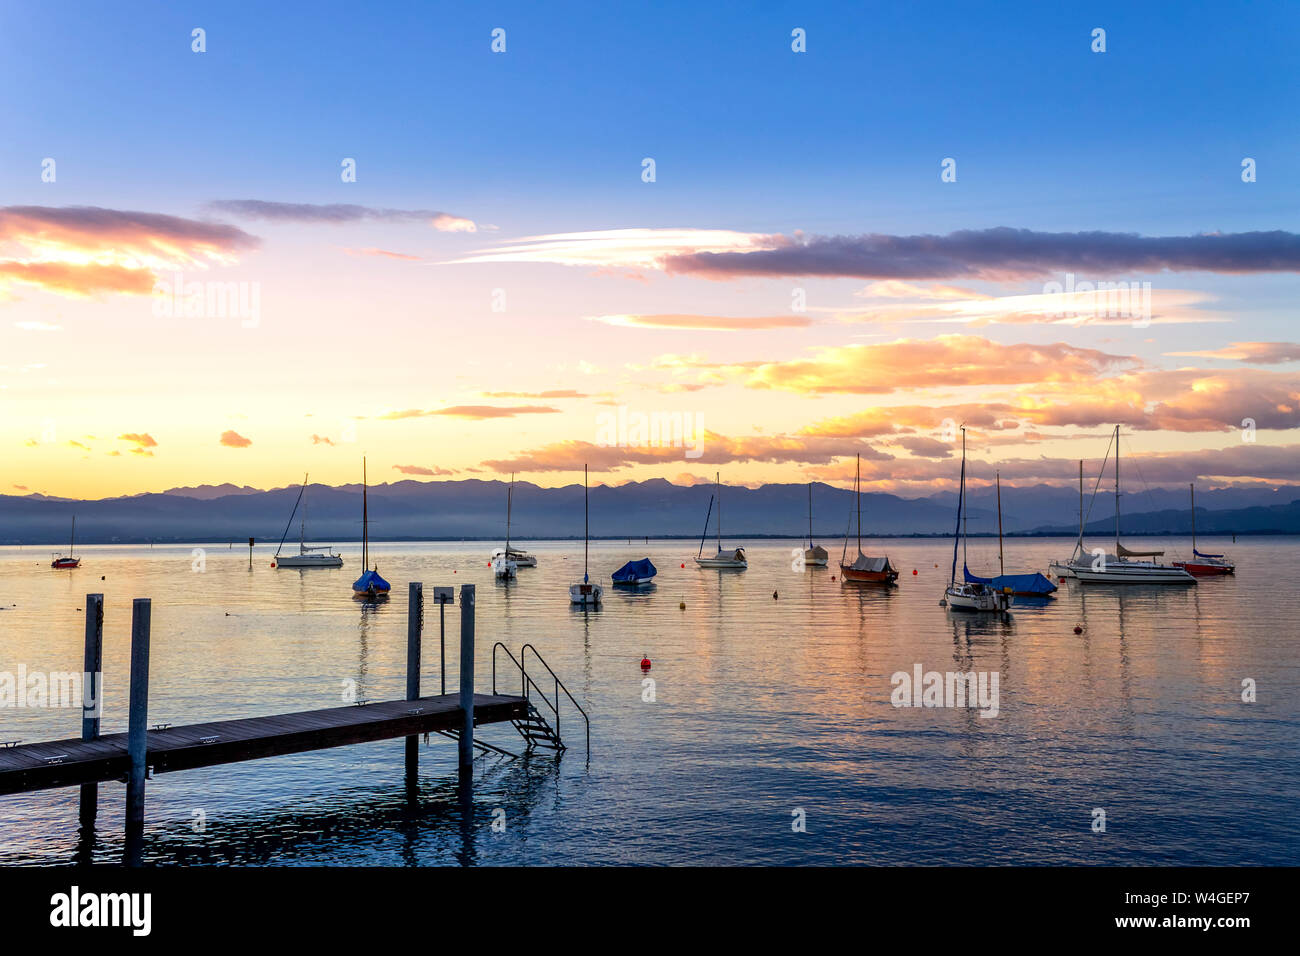 Harbour with sailing boats at sunset, Lake Constance, Wasserburg, Germany Stock Photo